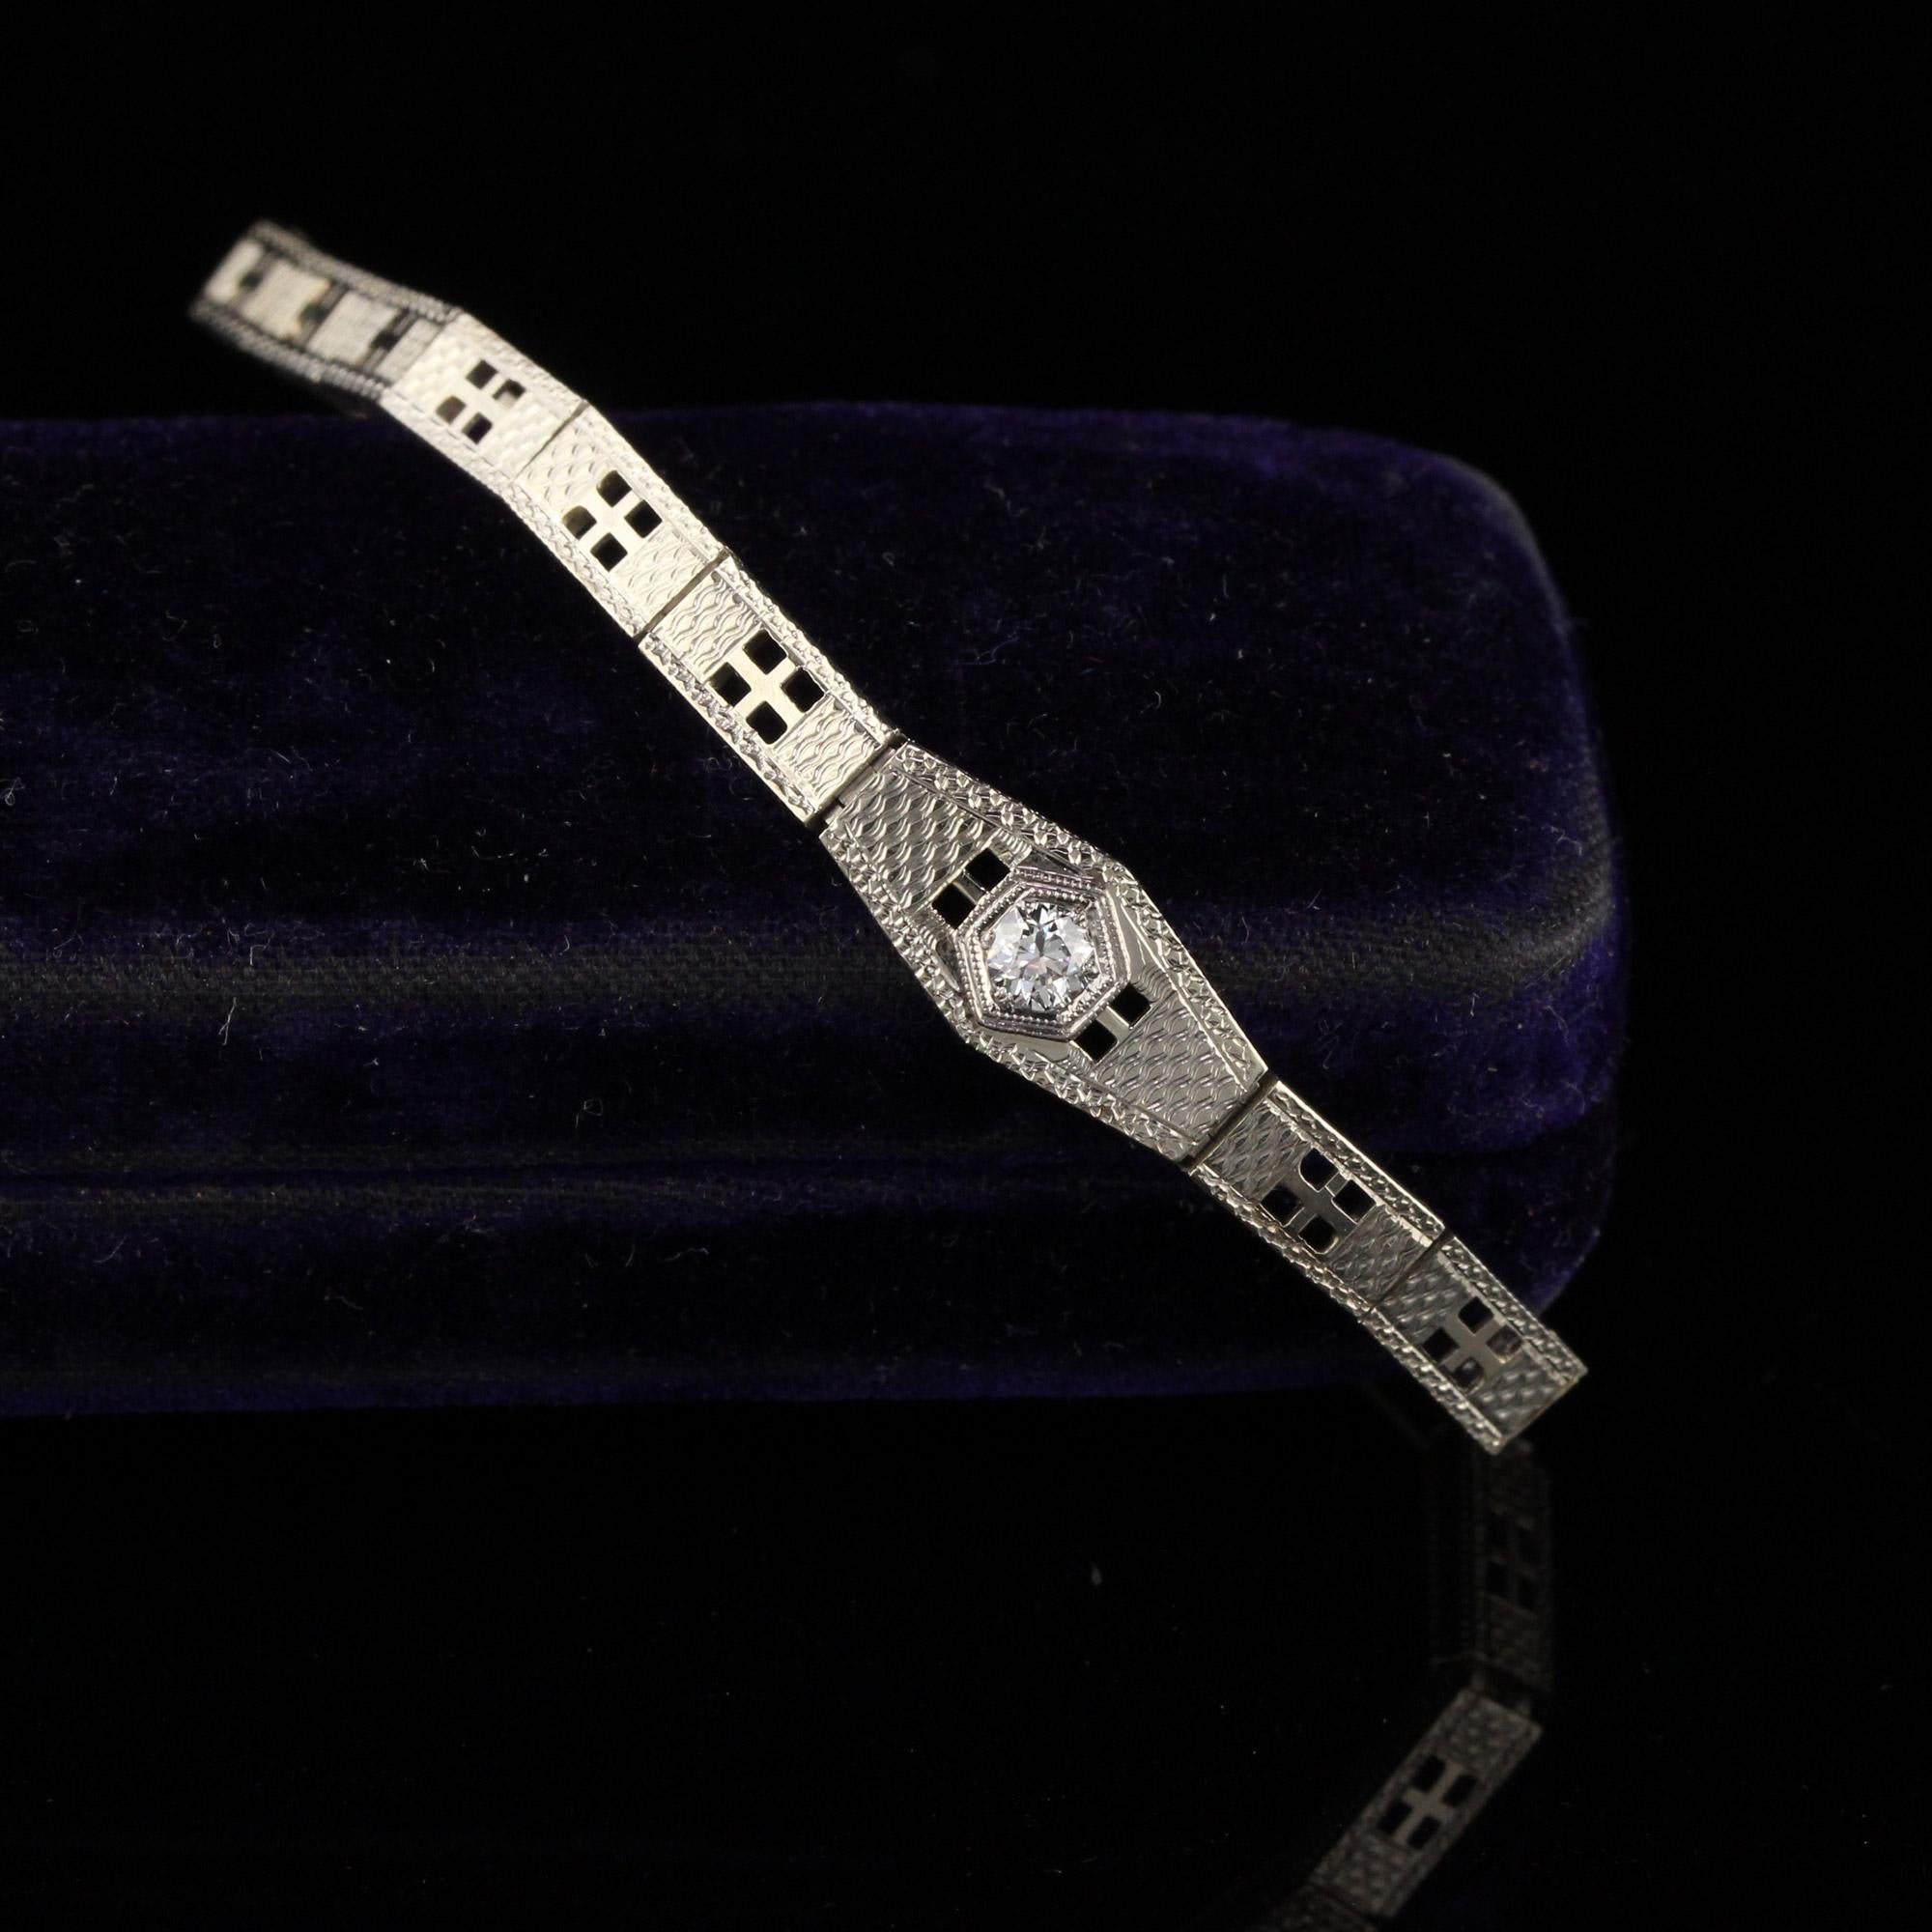 Gorgeous antique 18K white gold bracelet with a round diamond center. 

Item #B0027

Metal: 18K White Gold

Weight: 11.9 Grams

Total Diamond Weight: Approximately 0.15 cts 

Diamond Color: H

Diamond Clarity: VS1 

Bracelet Length: 6.75